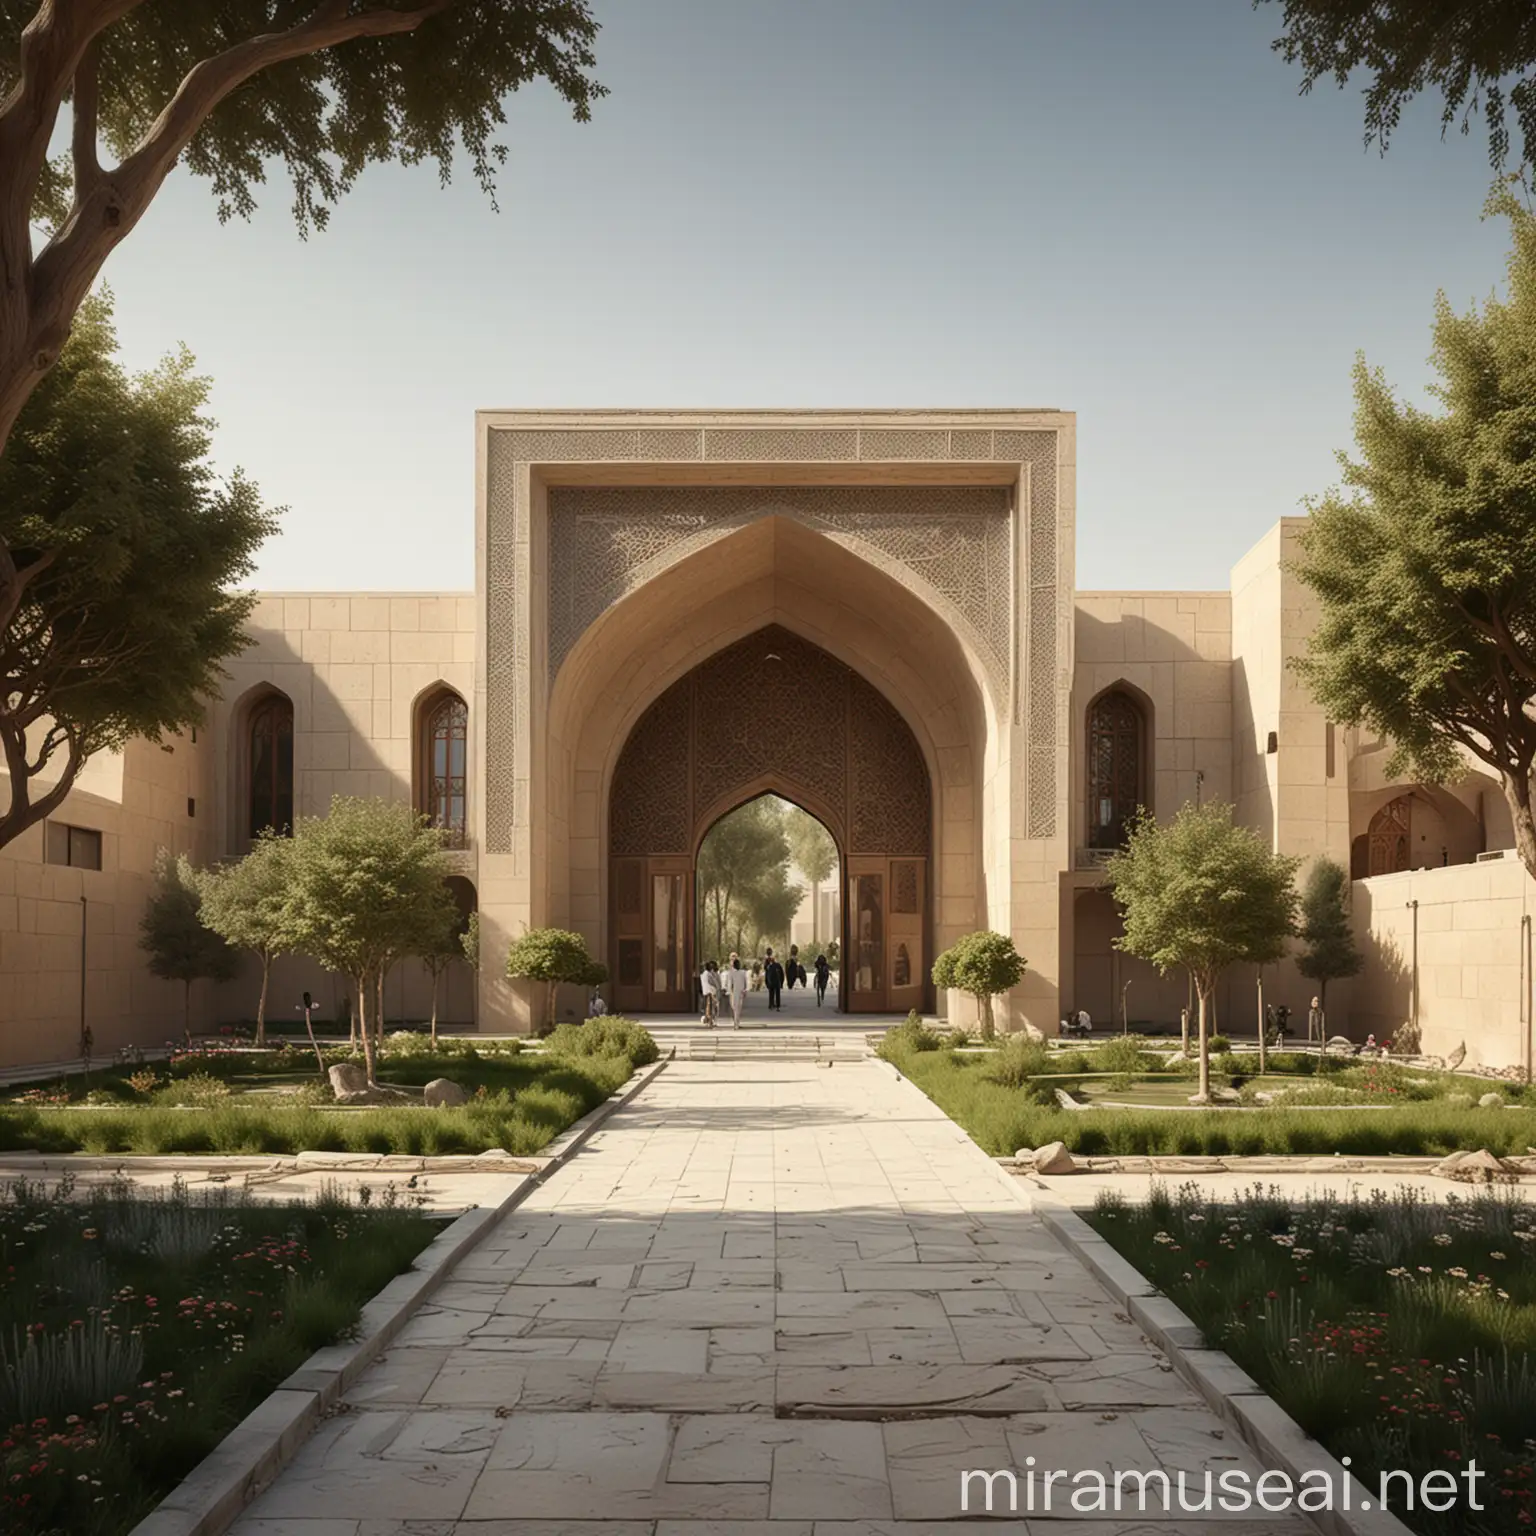 Modern Iranian Architecture Exterior Perspective of a Museum Entrance in Persian Garden Style